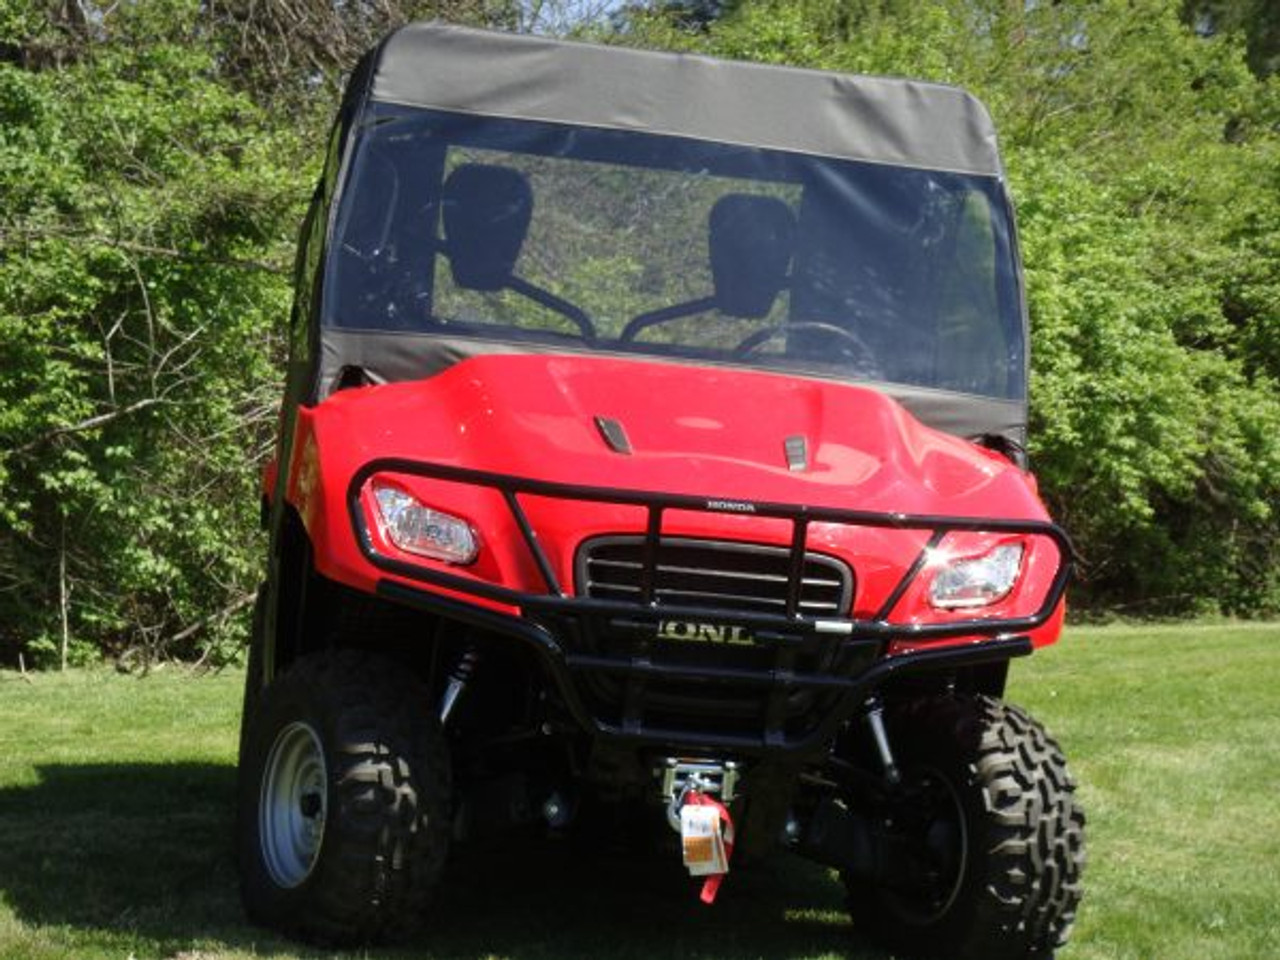 3 Star side x side Honda Big Red full cab enclosure front view